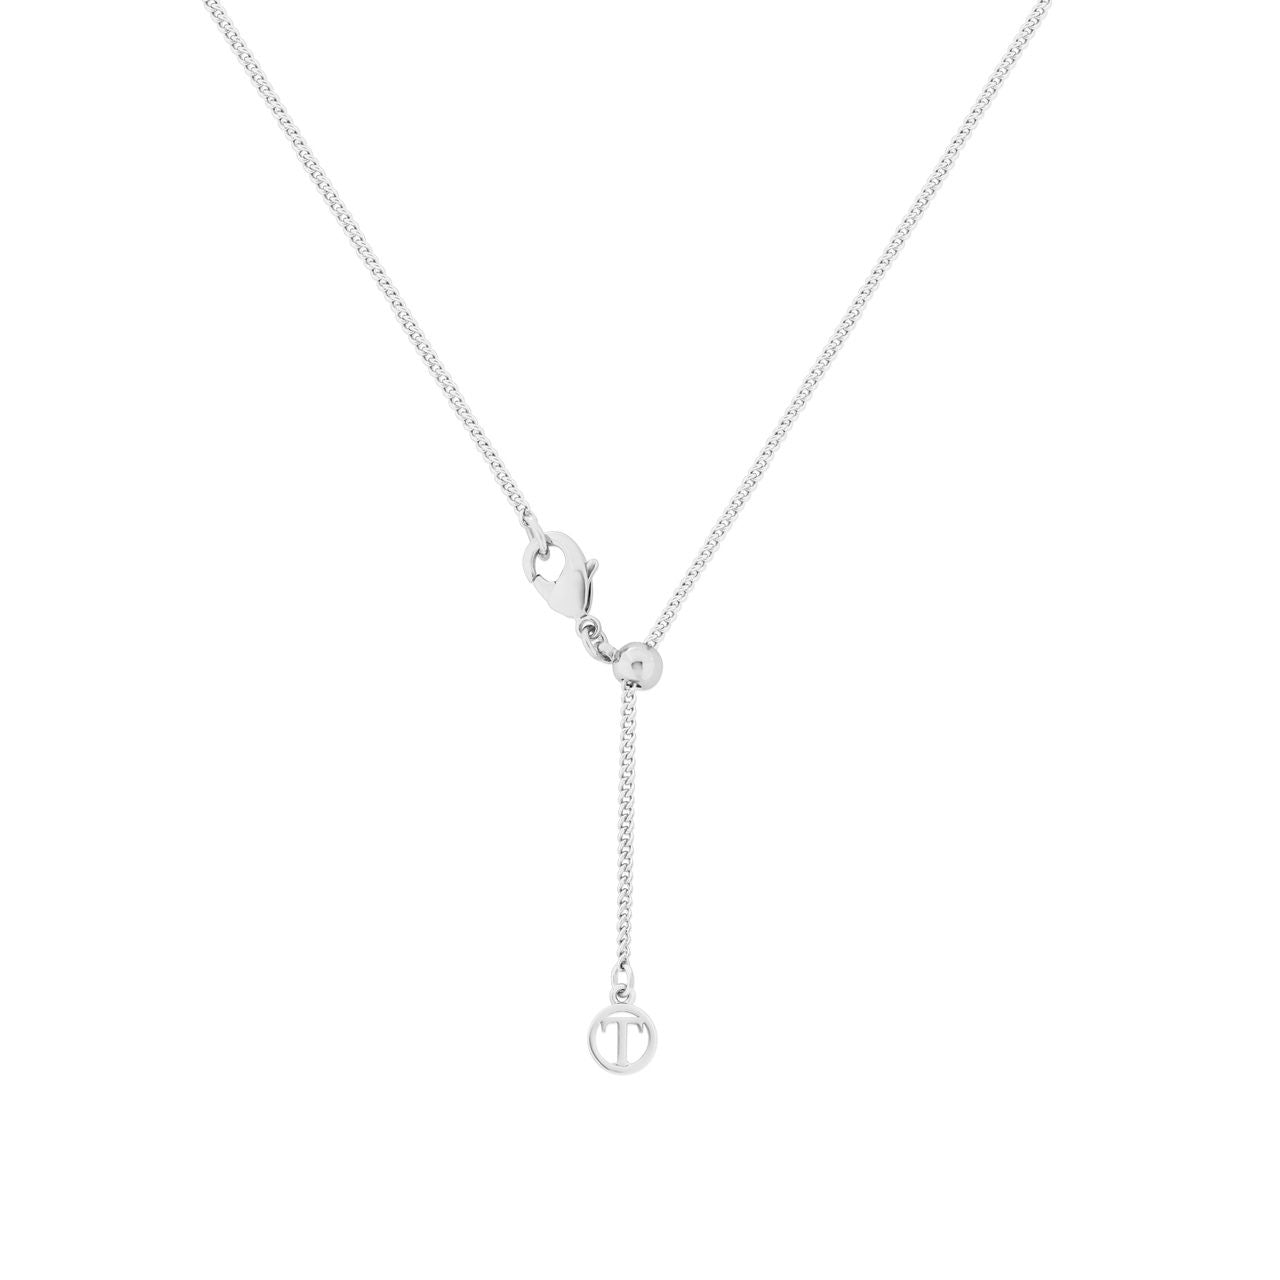 Silver T-Bar Pendant With Six Mini Pearls by Tipperary  This chic, silver T-Bar pendant from Tipperary expertly combines traditional design with a modern twist. With a classic pearl center, this piece adds a timeless sophistication to any outfit. Elevate your style with this high-quality pendant.